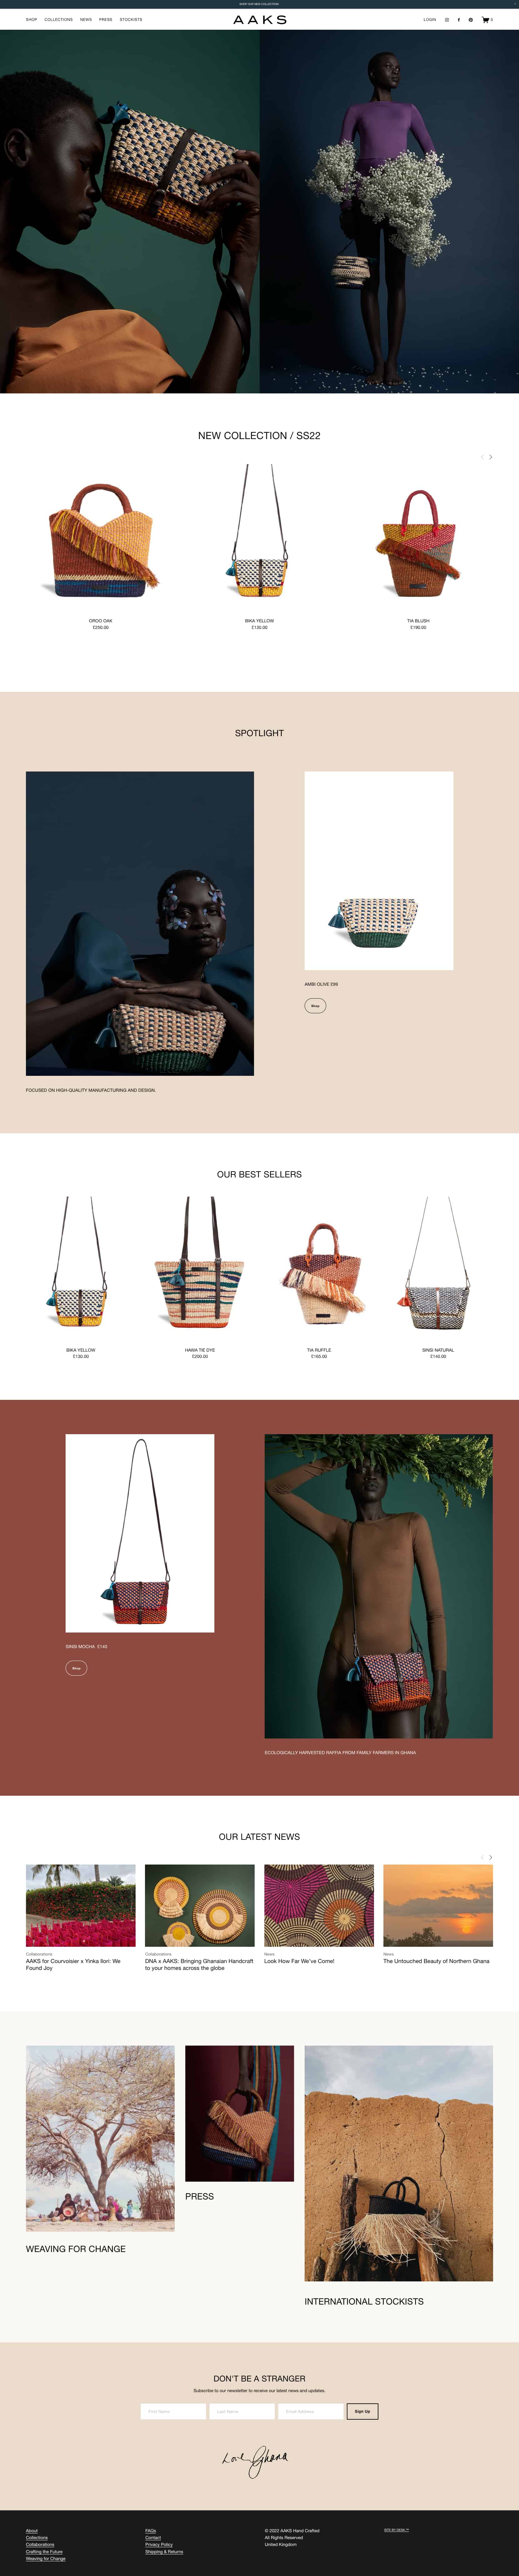 Squarespace Ecommerce Examples 2: 1st R.O.W. - Immersive UX with Minimalist Navigation